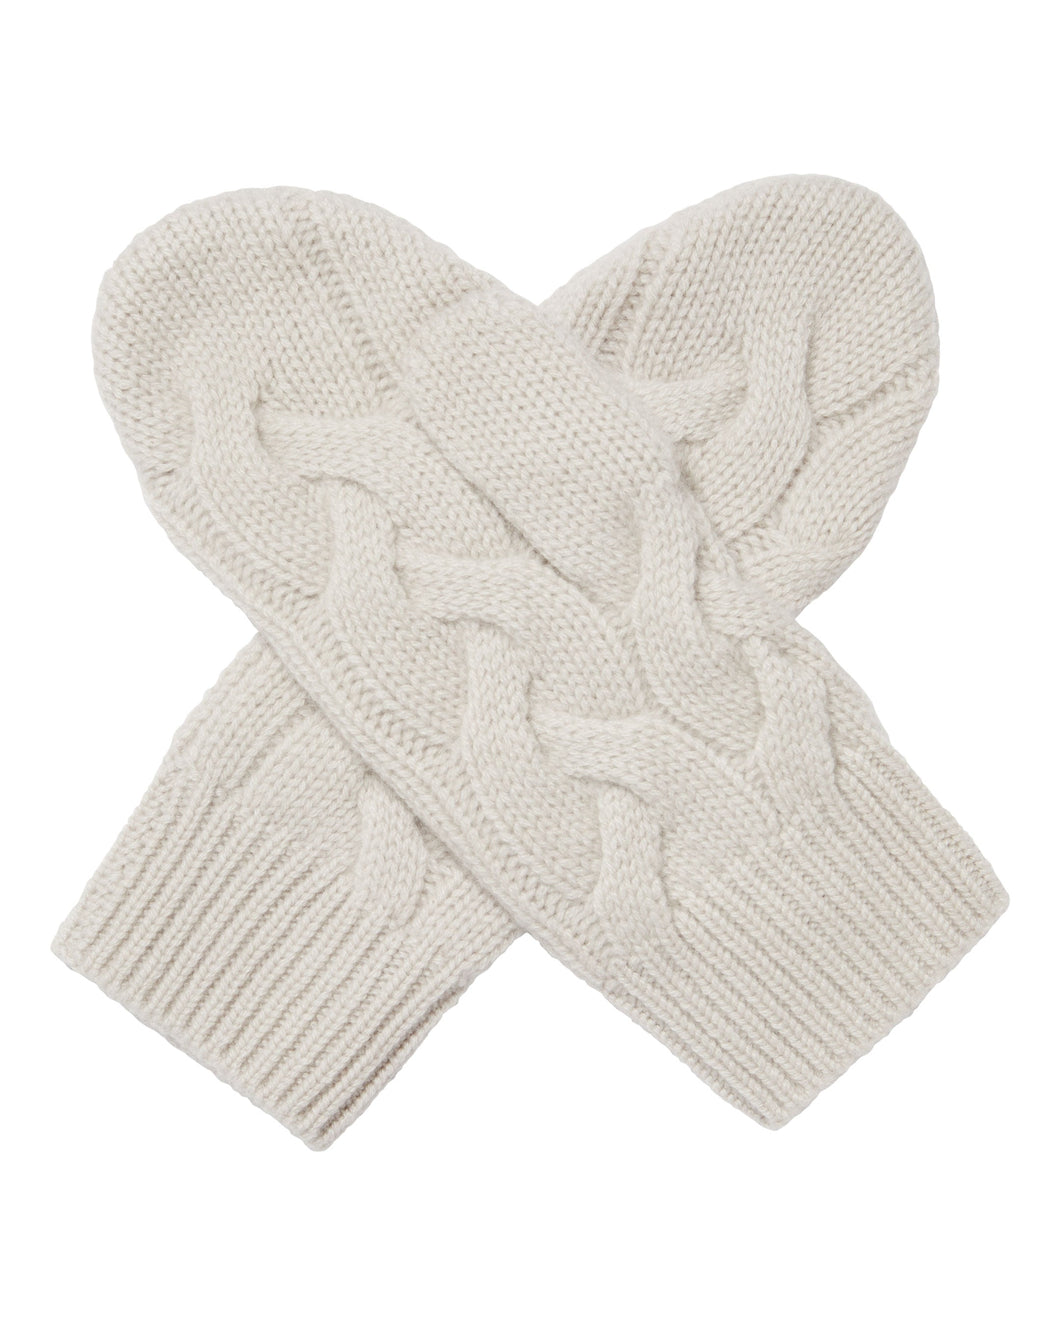 N.Peal Women's Cashmere Cable Mittens Snow Grey